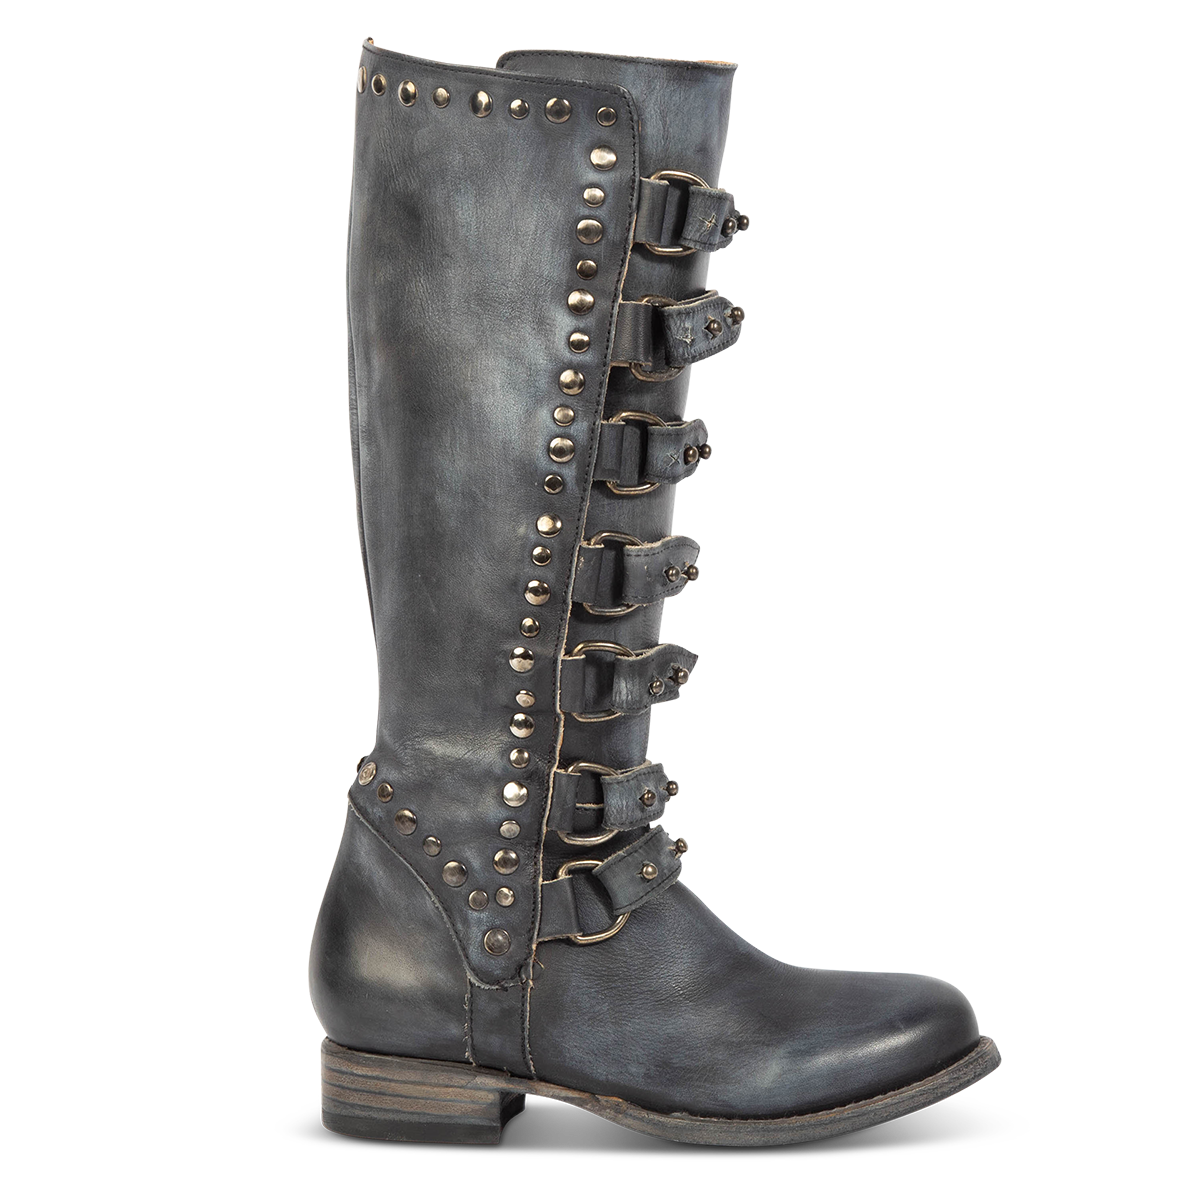 FREEBIRD women's Rory navy leather boot with leather straps stacking up the front shaft and low block heel